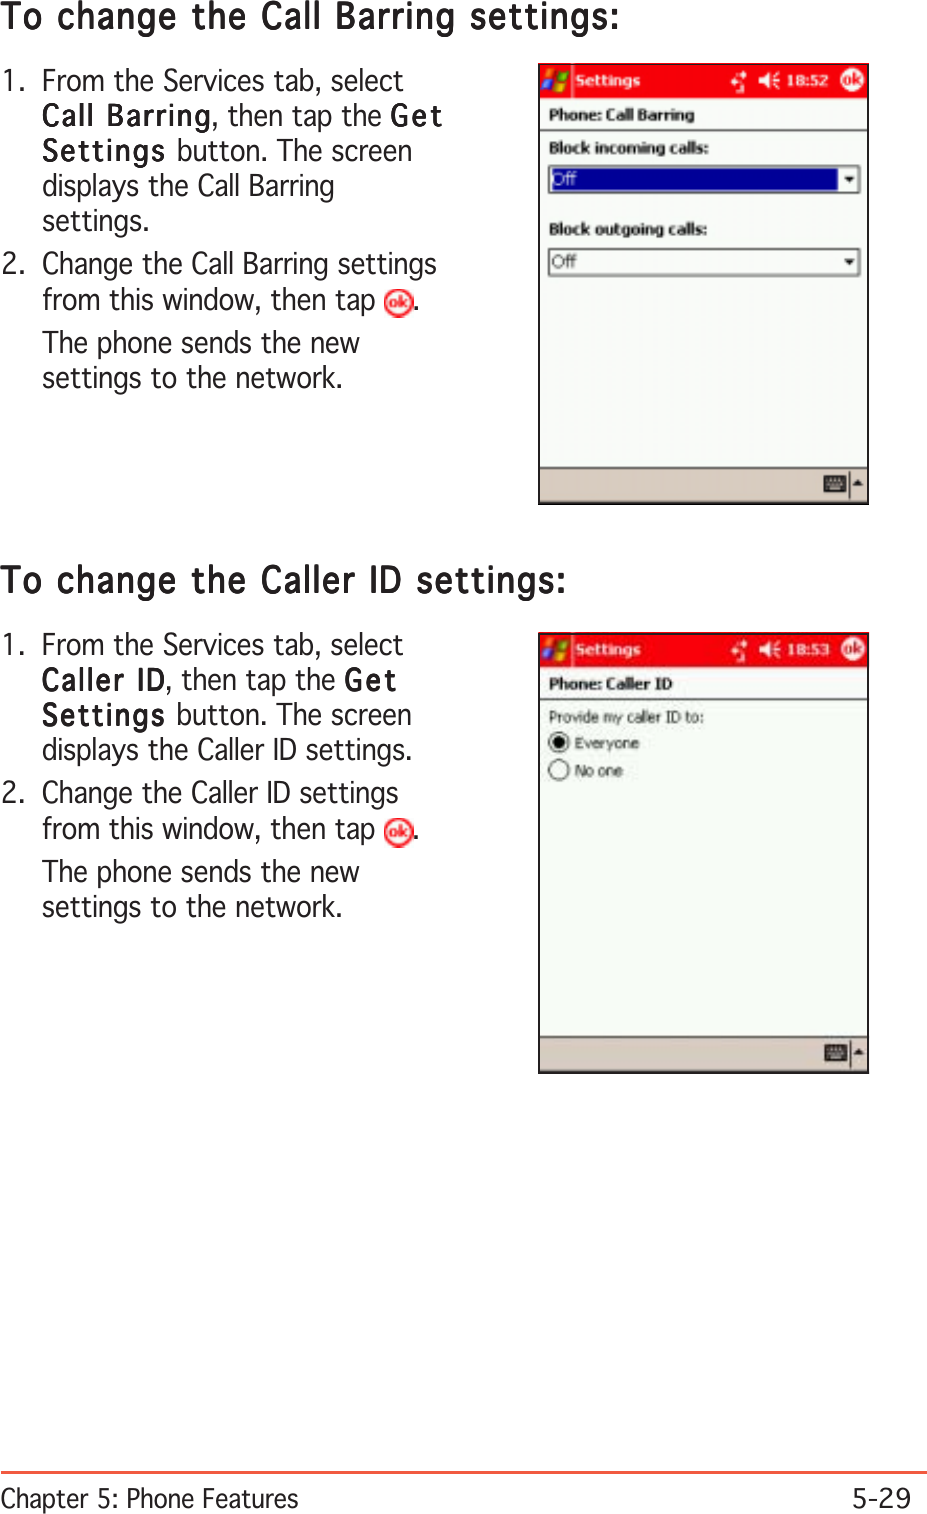 Chapter 5: Phone Features5-29To change the Call Barring settings:To change the Call Barring settings:To change the Call Barring settings:To change the Call Barring settings:To change the Call Barring settings:1. From the Services tab, selectCall BarringCall BarringCall BarringCall BarringCall Barring, then tap the GetGetGetGetGetSettingsSettingsSettingsSettingsSettings button. The screendisplays the Call Barringsettings.2. Change the Call Barring settingsfrom this window, then tap  .The phone sends the newsettings to the network.To change the Caller ID settings:To change the Caller ID settings:To change the Caller ID settings:To change the Caller ID settings:To change the Caller ID settings:1. From the Services tab, selectCaller IDCaller IDCaller IDCaller IDCaller ID, then tap the GetGetGetGetGetSettingsSettingsSettingsSettingsSettings button. The screendisplays the Caller ID settings.2. Change the Caller ID settingsfrom this window, then tap  .The phone sends the newsettings to the network.